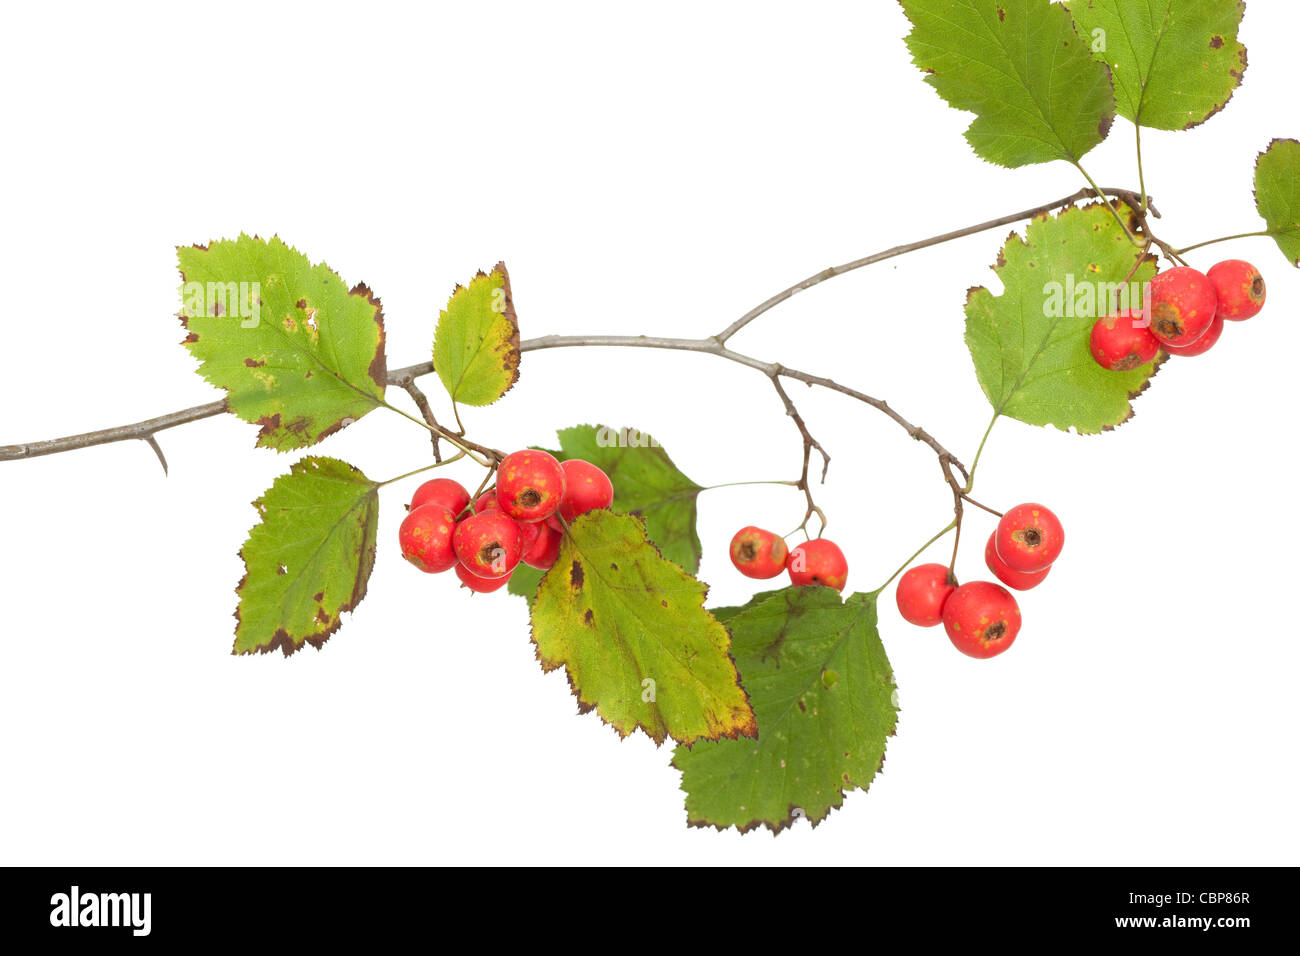 Hawthorn branch close up on white background Stock Photo